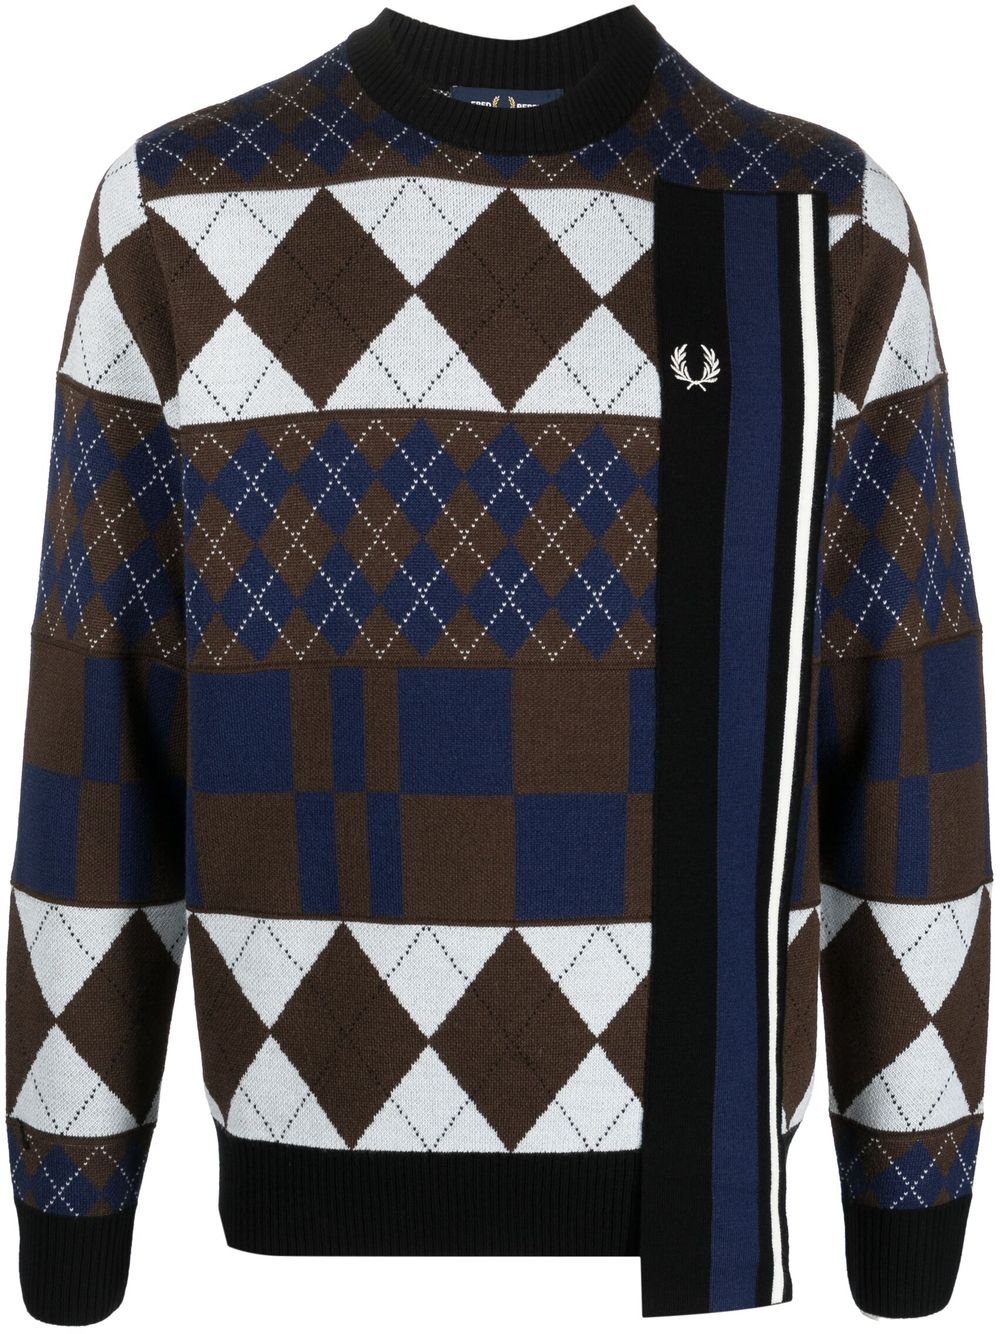 Fred Perry argyle knit jumper - Brown von Fred Perry